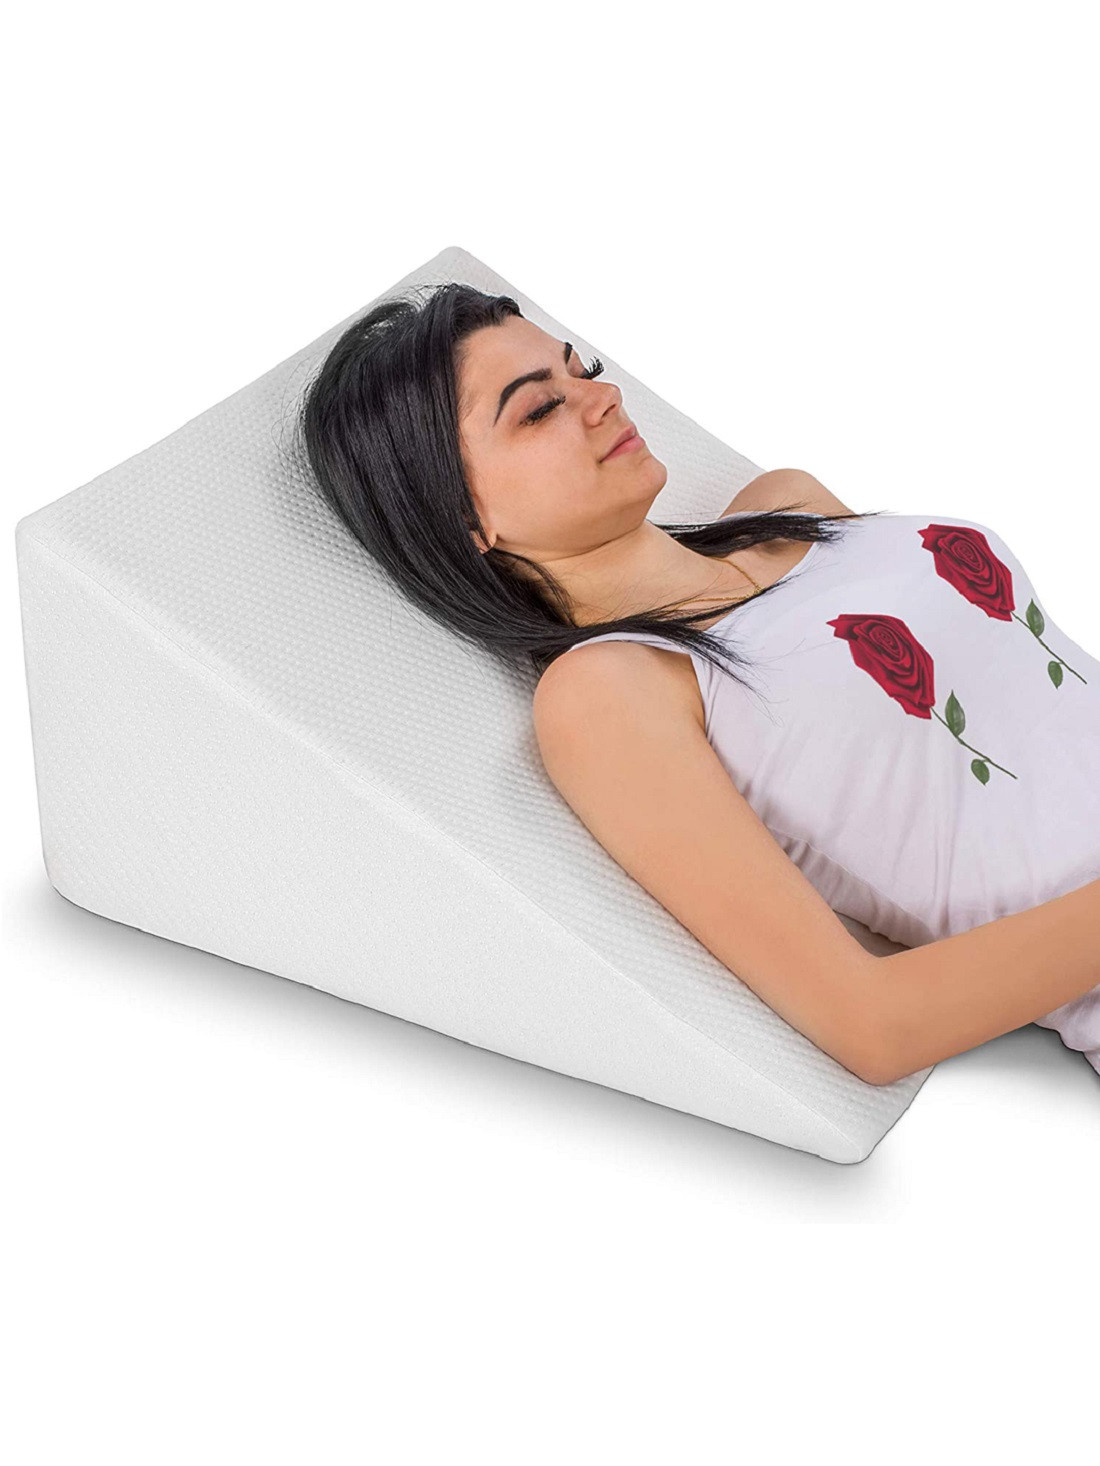 Kuber Industries Bed Wedge Pillow for Acid Reflux for Sleeping Helps in Heartburn Leg Elevation Post Surgery| Medical Grade Sponge | Washable Dryfit Soft Fabric Dark Colour Cover (Cream)